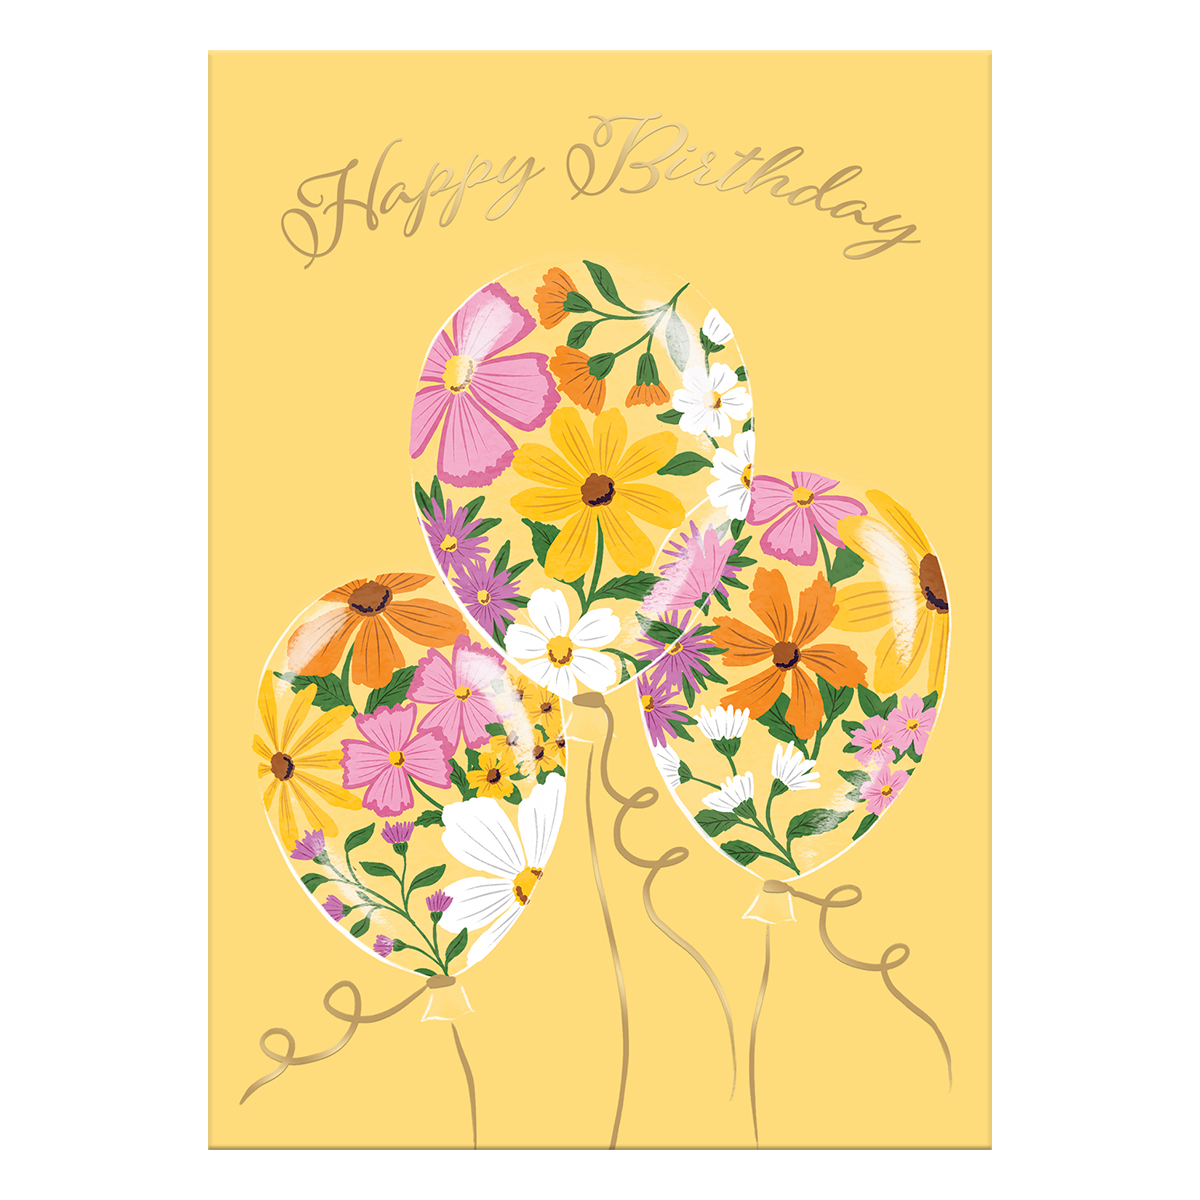 Floral Balloons Greeting Card Product